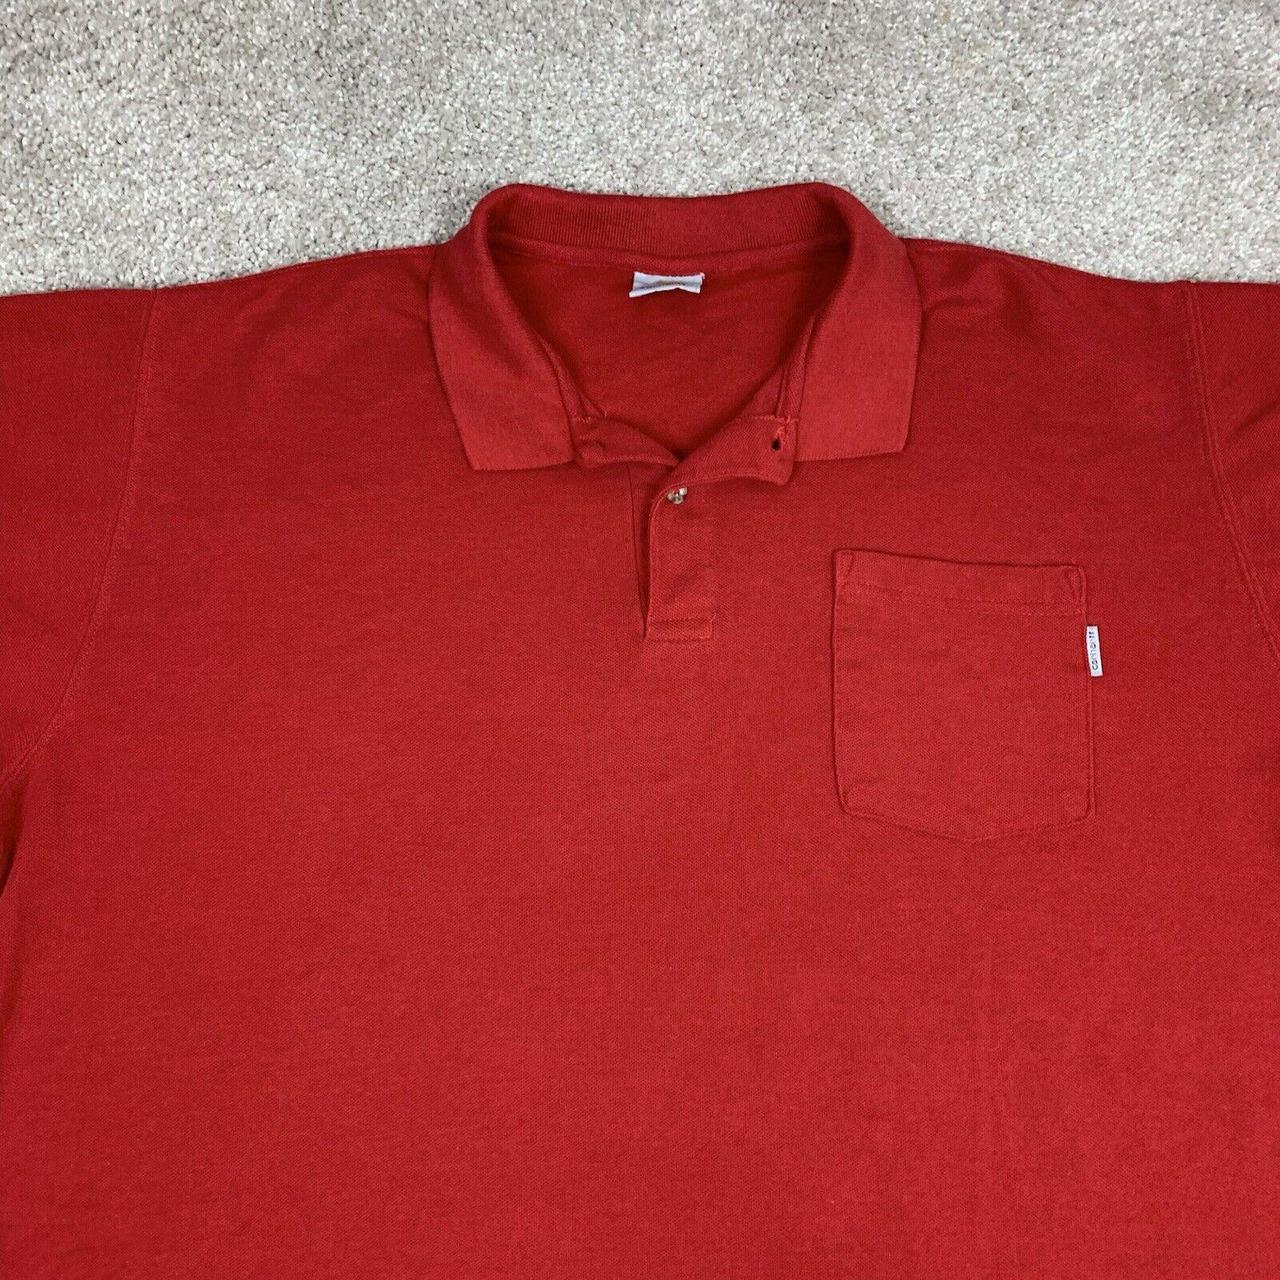 Carhartt Polo Shirt Mens Extra Large Red Outdoor... - Depop